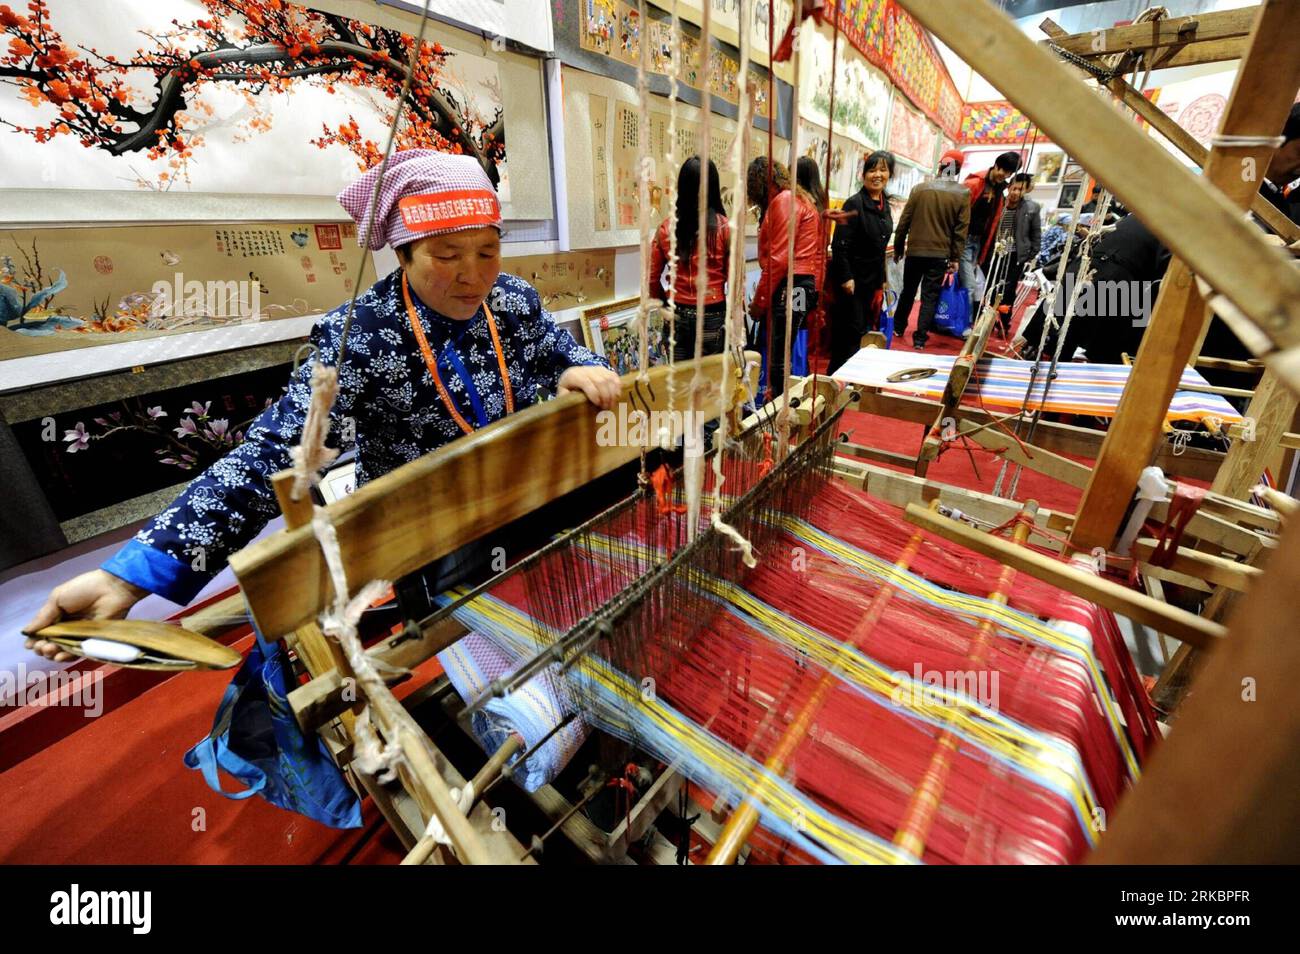 Bildnummer: 54591416  Datum: 02.11.2010  Copyright: imago/Xinhua (101102) -- YANGLING, Nov. 2, 2010 (Xinhua) -- Craftswomen demonstrate hand weaving at an agricultural exhibition in Yangling, northwest China s Shaanxi Province, Nov. 2, 2010. The traditional hand weaving originated in Shaanxi has a history of thousands years, and the industry is reviving in Shaanxi as the textiles win popularity among buyers for bright colors and the organic quality. (Xinhua/Liu Xiao) (zhs) CHINA-SHAANXI-HANDWEAVING (CN) PUBLICATIONxNOTxINxCHN Gesellschaft Arbeitswelten Frauen Weben Weberei Handwerk Webstuhl kb Stock Photo